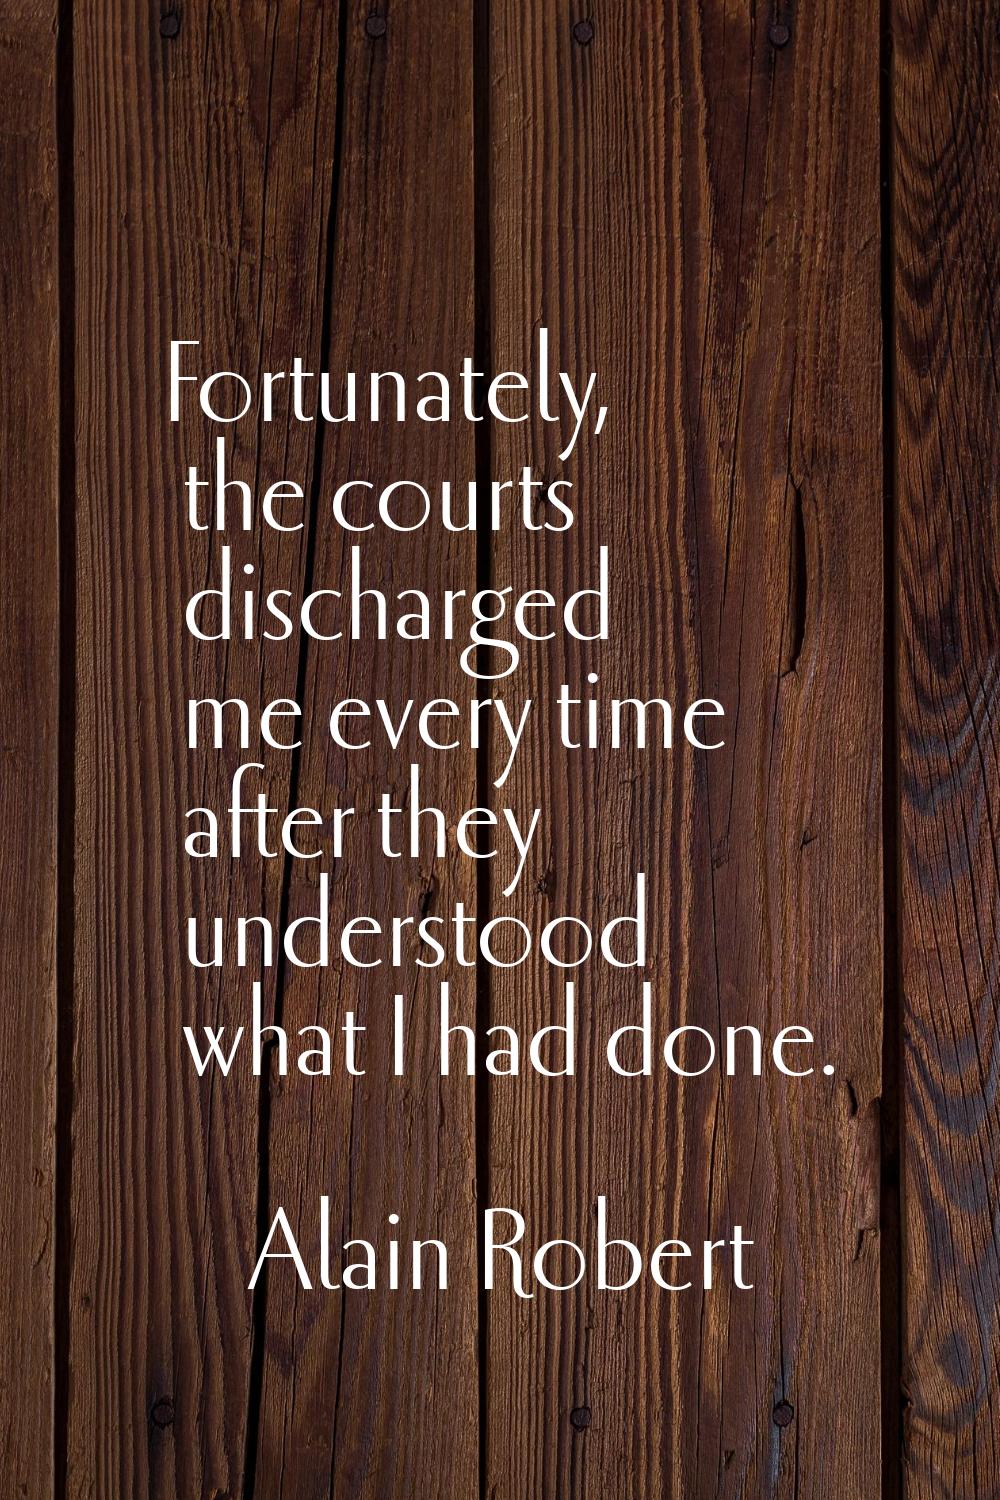 Fortunately, the courts discharged me every time after they understood what I had done.